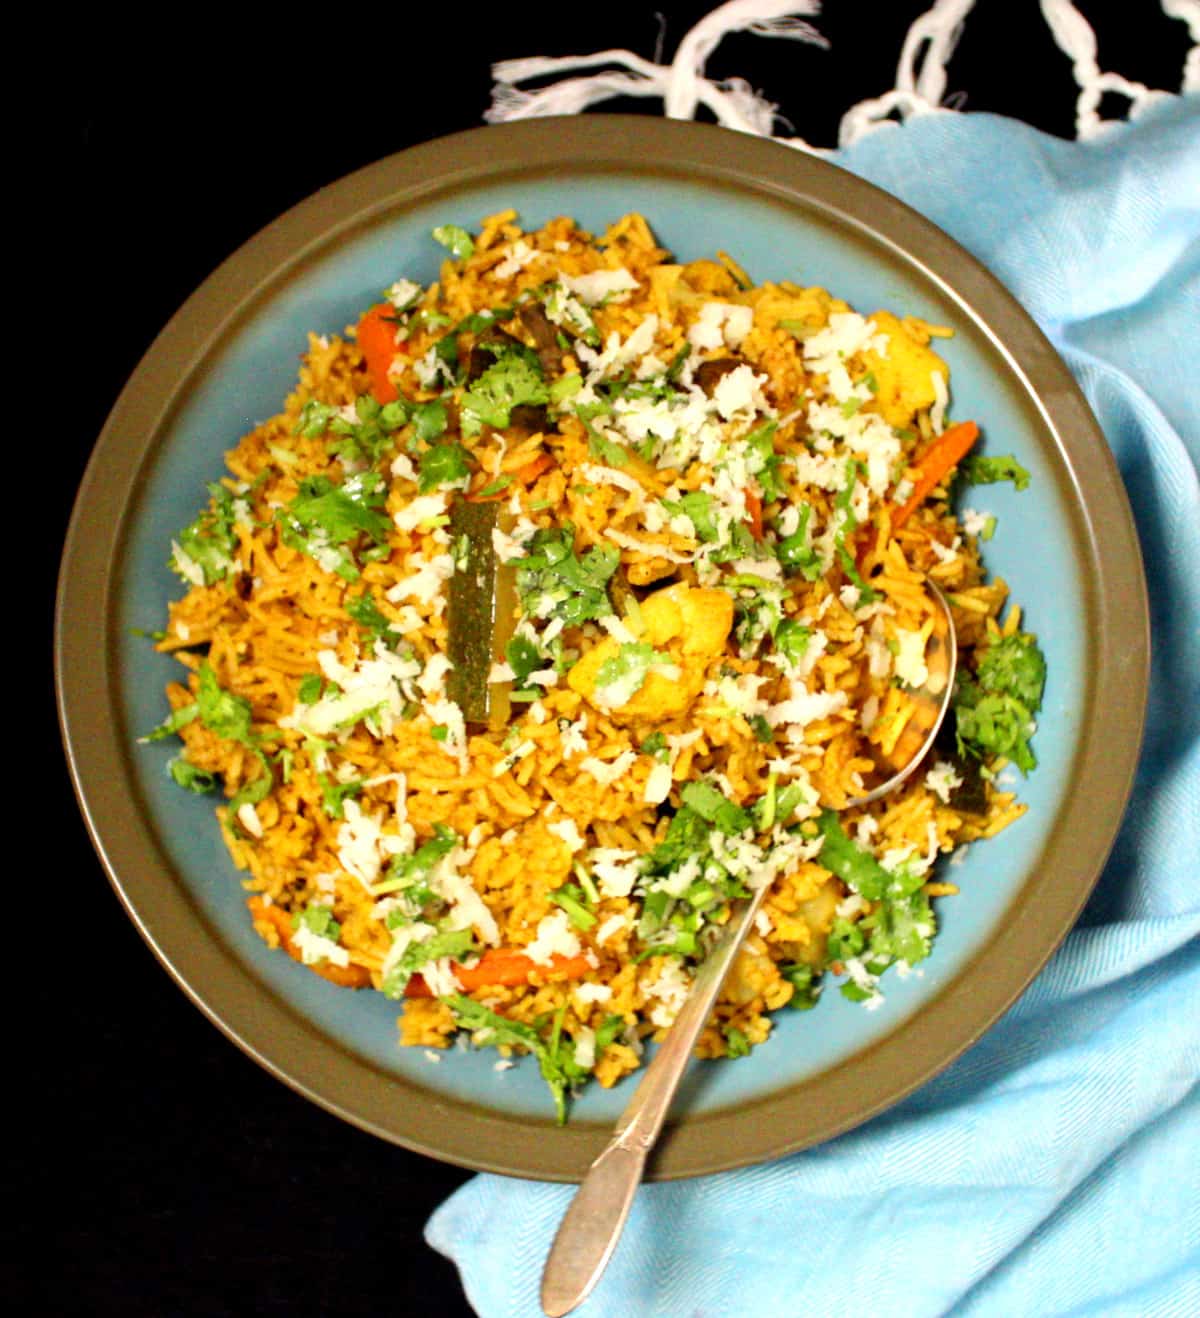 Spicy masale bhath in a blue and brown bowl with a spoon and blue napkin.